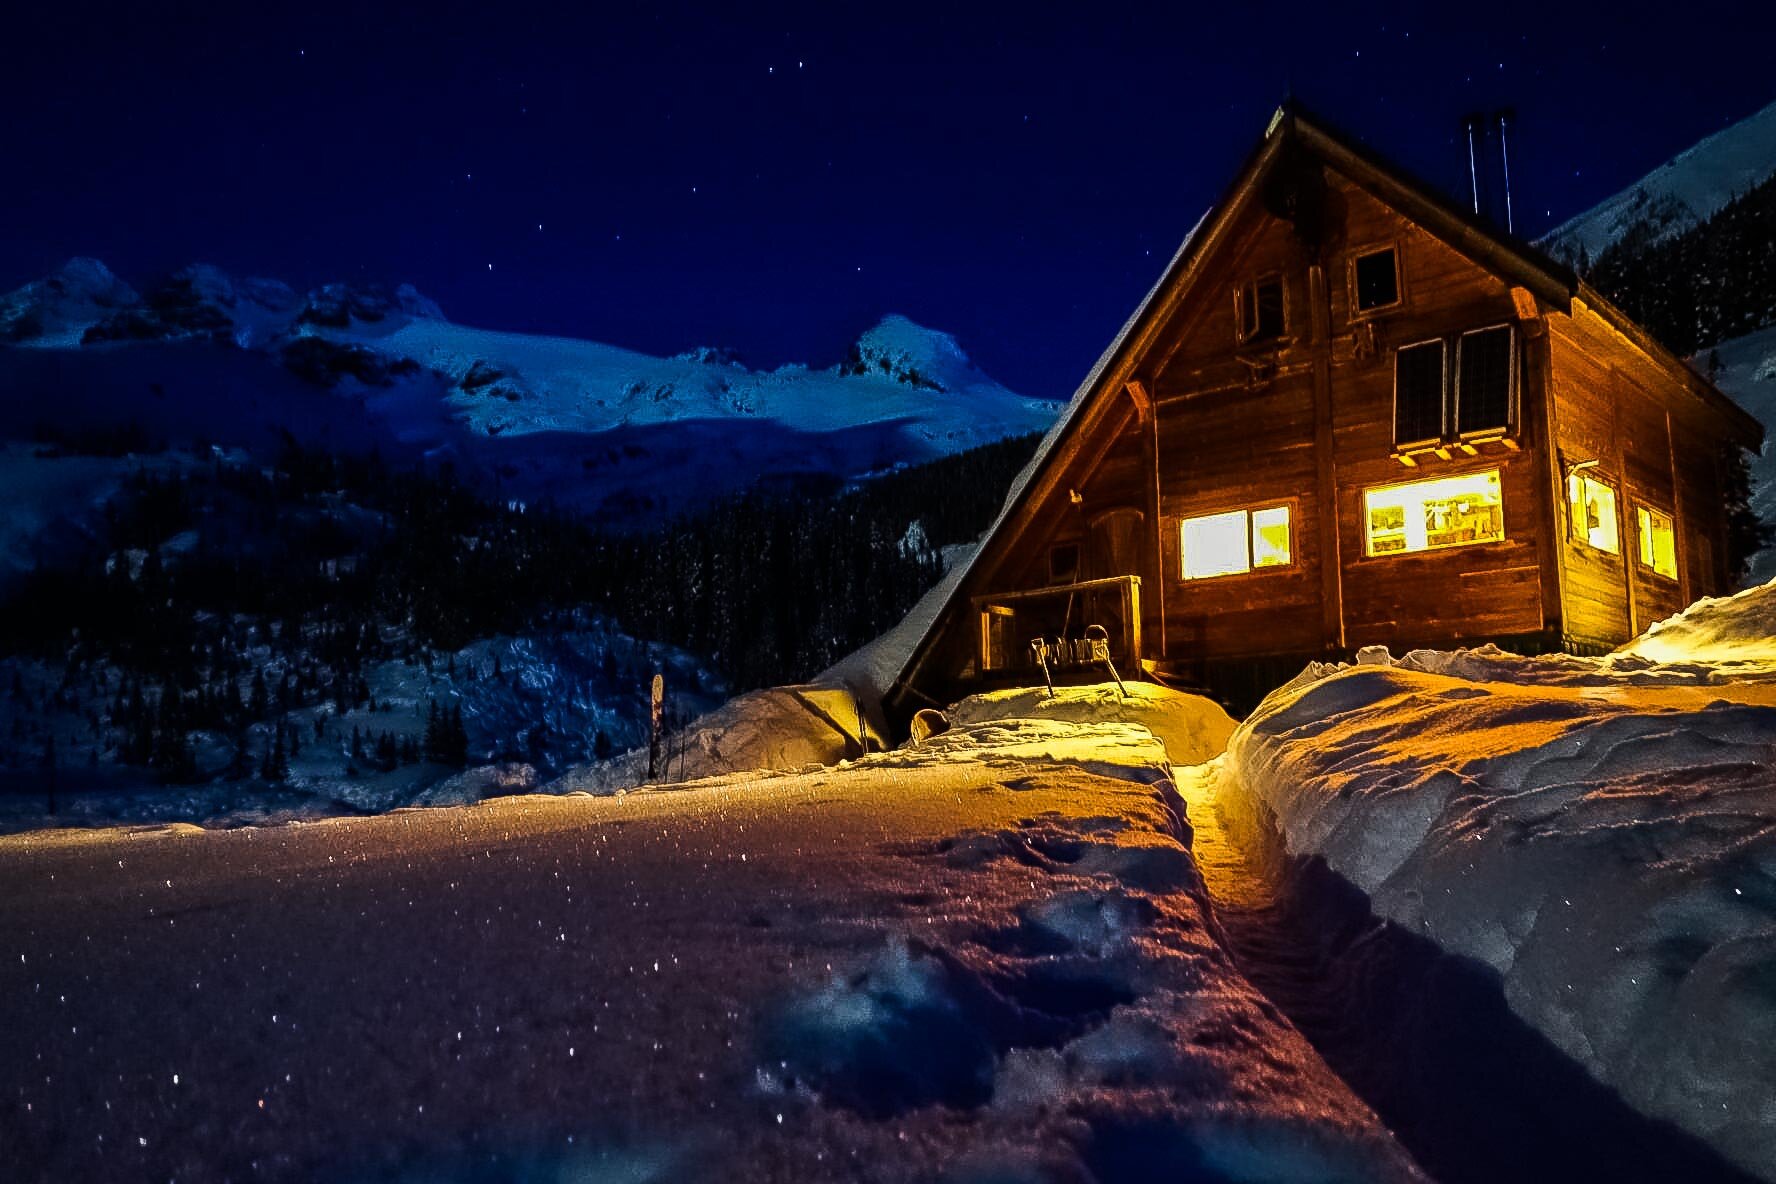 Remote Backcountry Ski Lodges in British Columbia